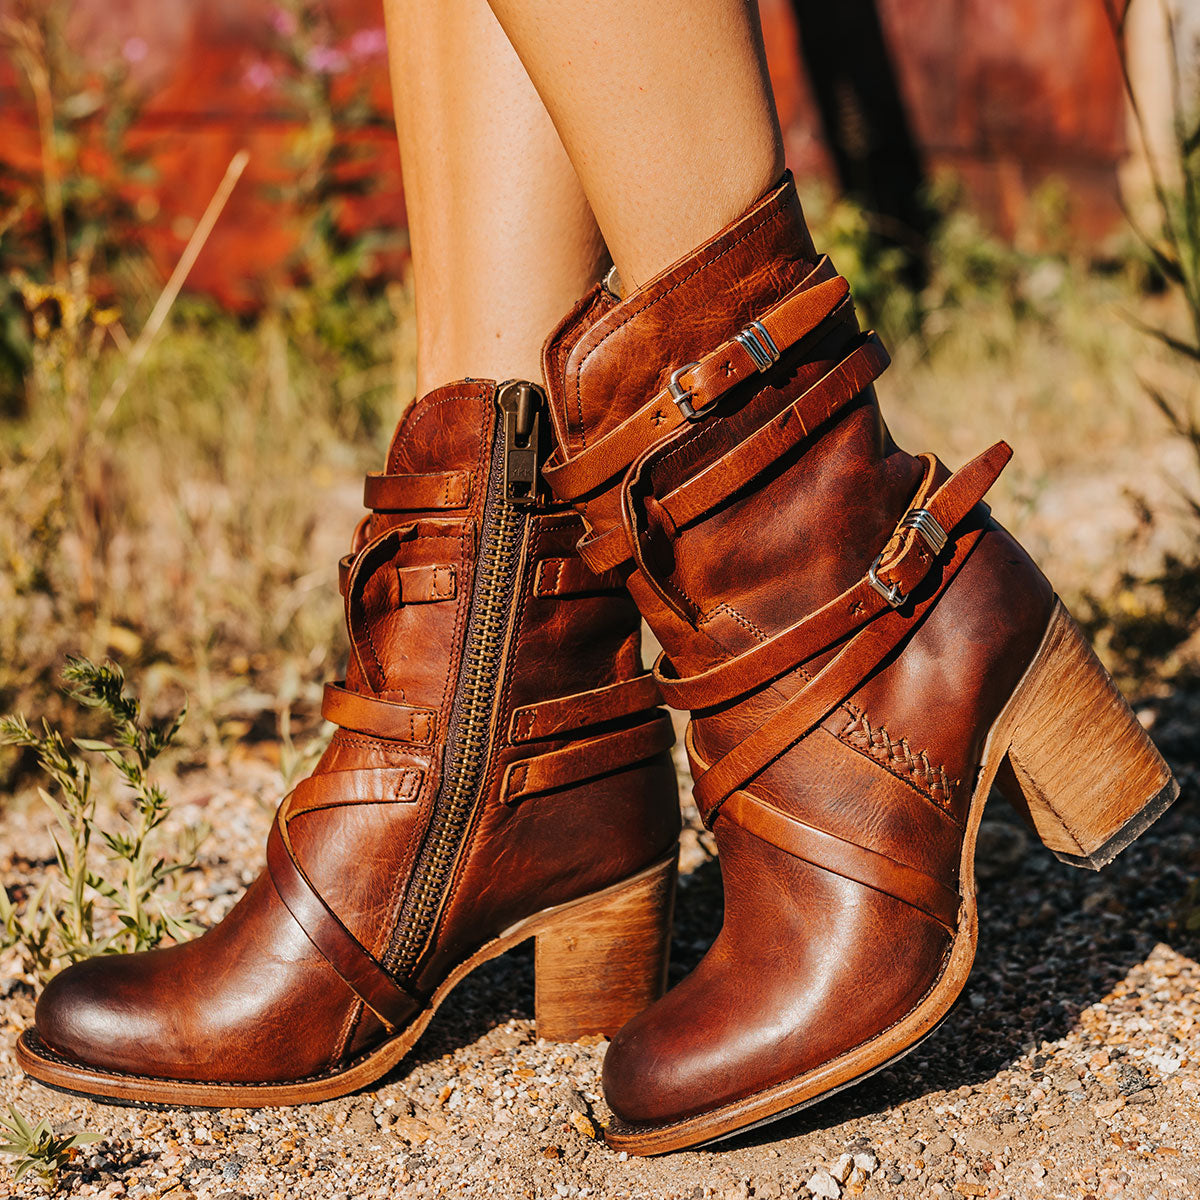 FREEBIRD women's Baker cognac inside brass zip closure boot with fashion straps and stacked heel